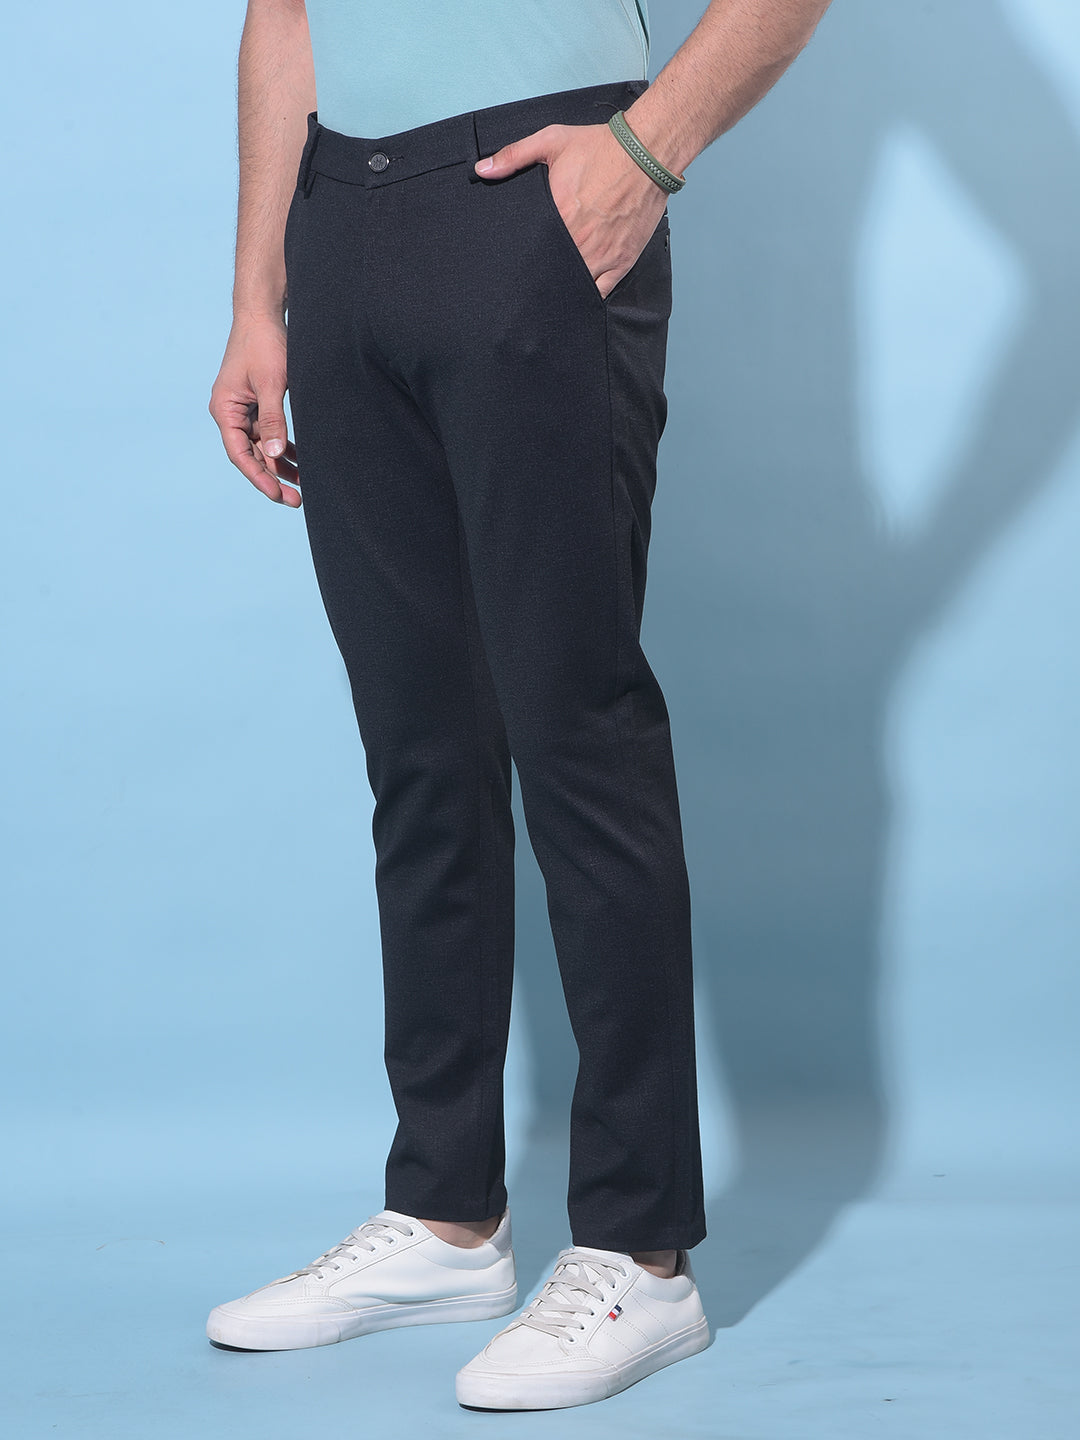 Black Textured Printed Chinos Trousers-Men Trousers-Crimsoune Club